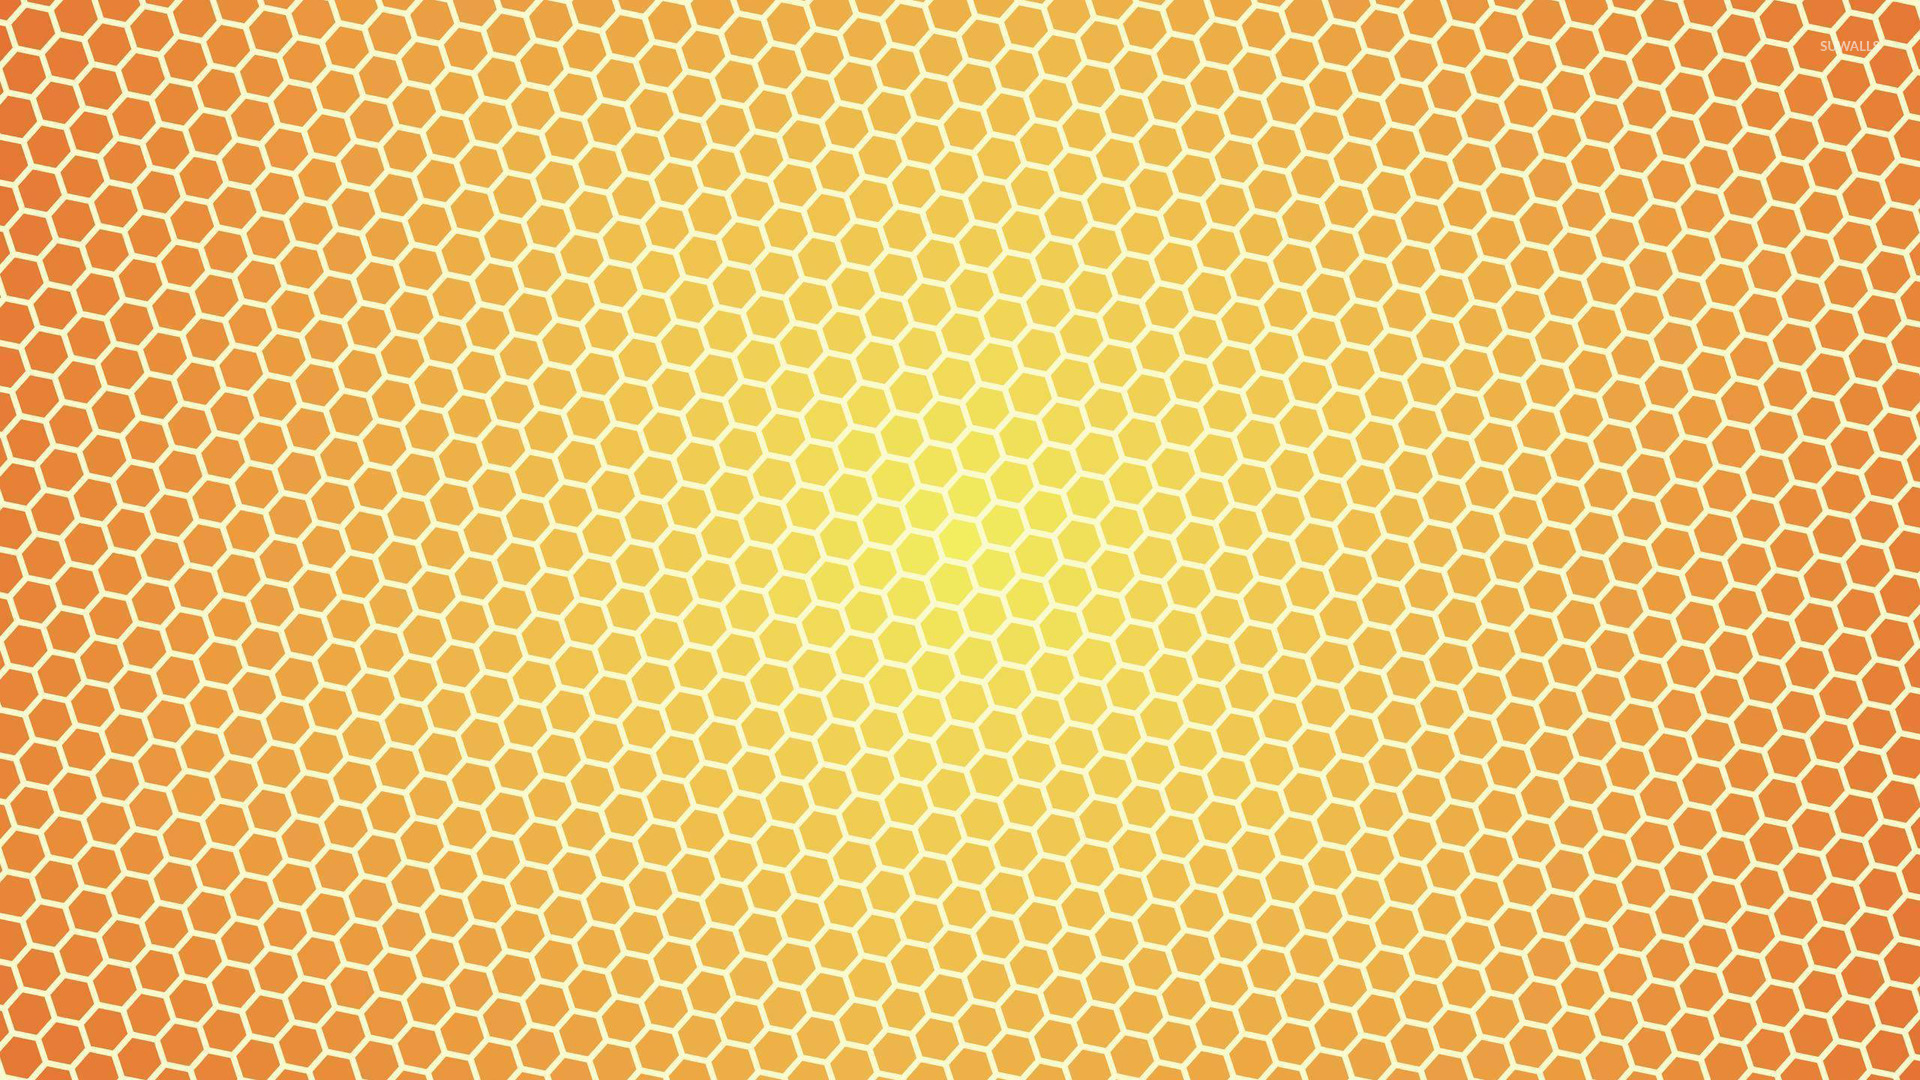 Honey pattern wallpaper   Abstract wallpapers   14518